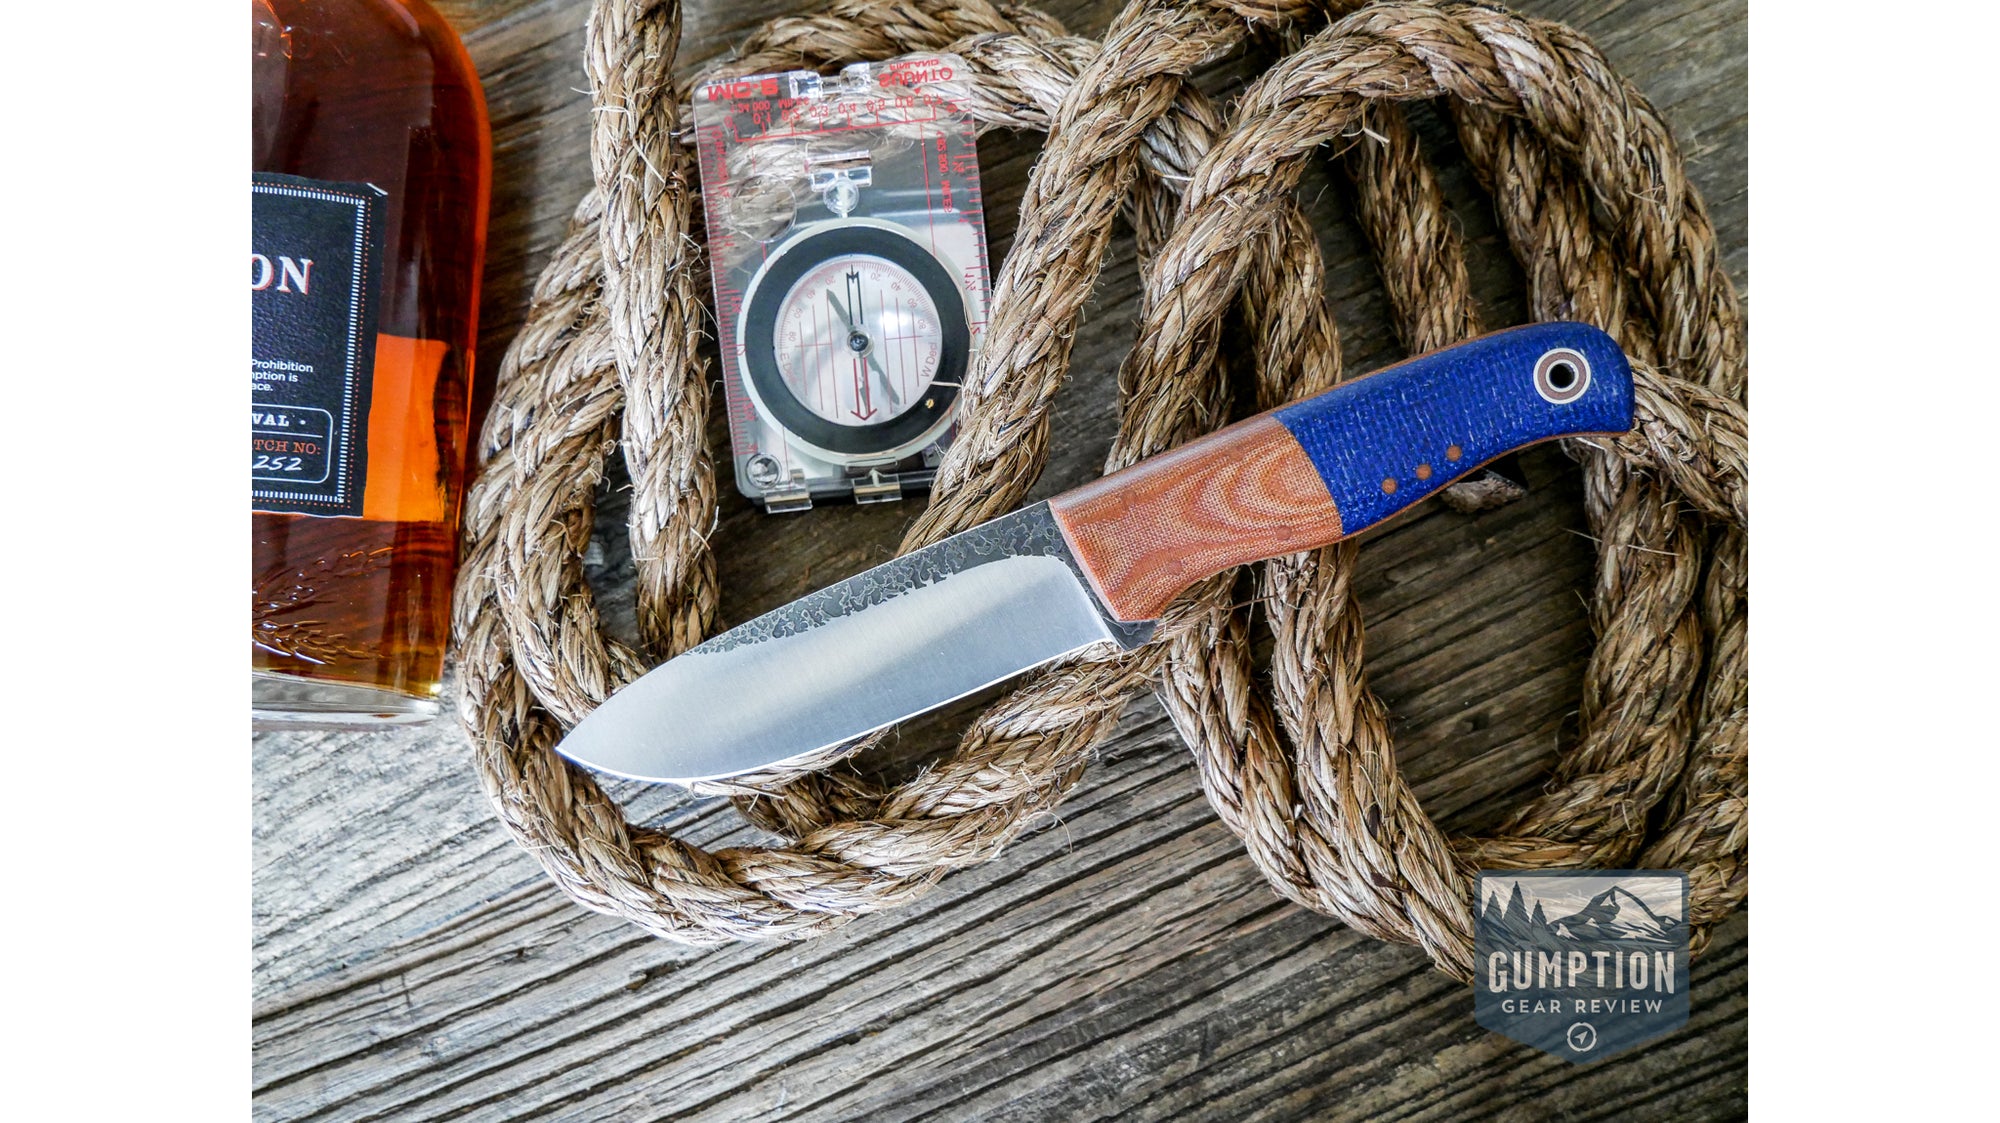 Fiddleback Forge Bushcrafter, As Featured in Gumption Gear Review